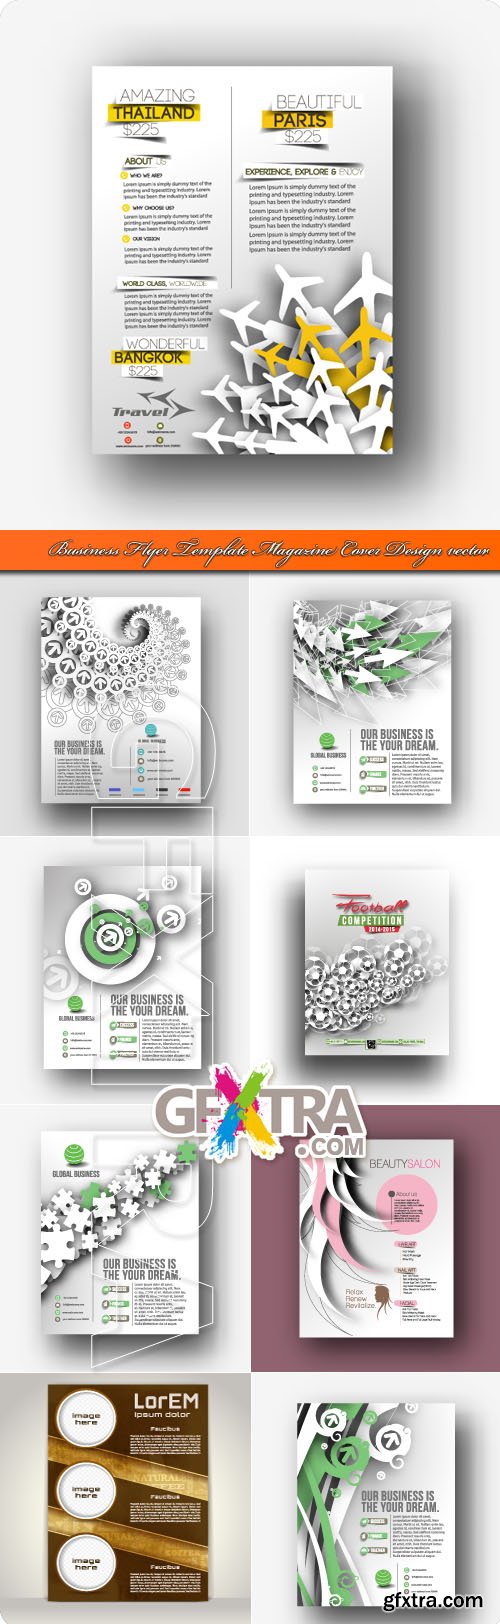 Business Flyer Template Magazine Cover Design vector